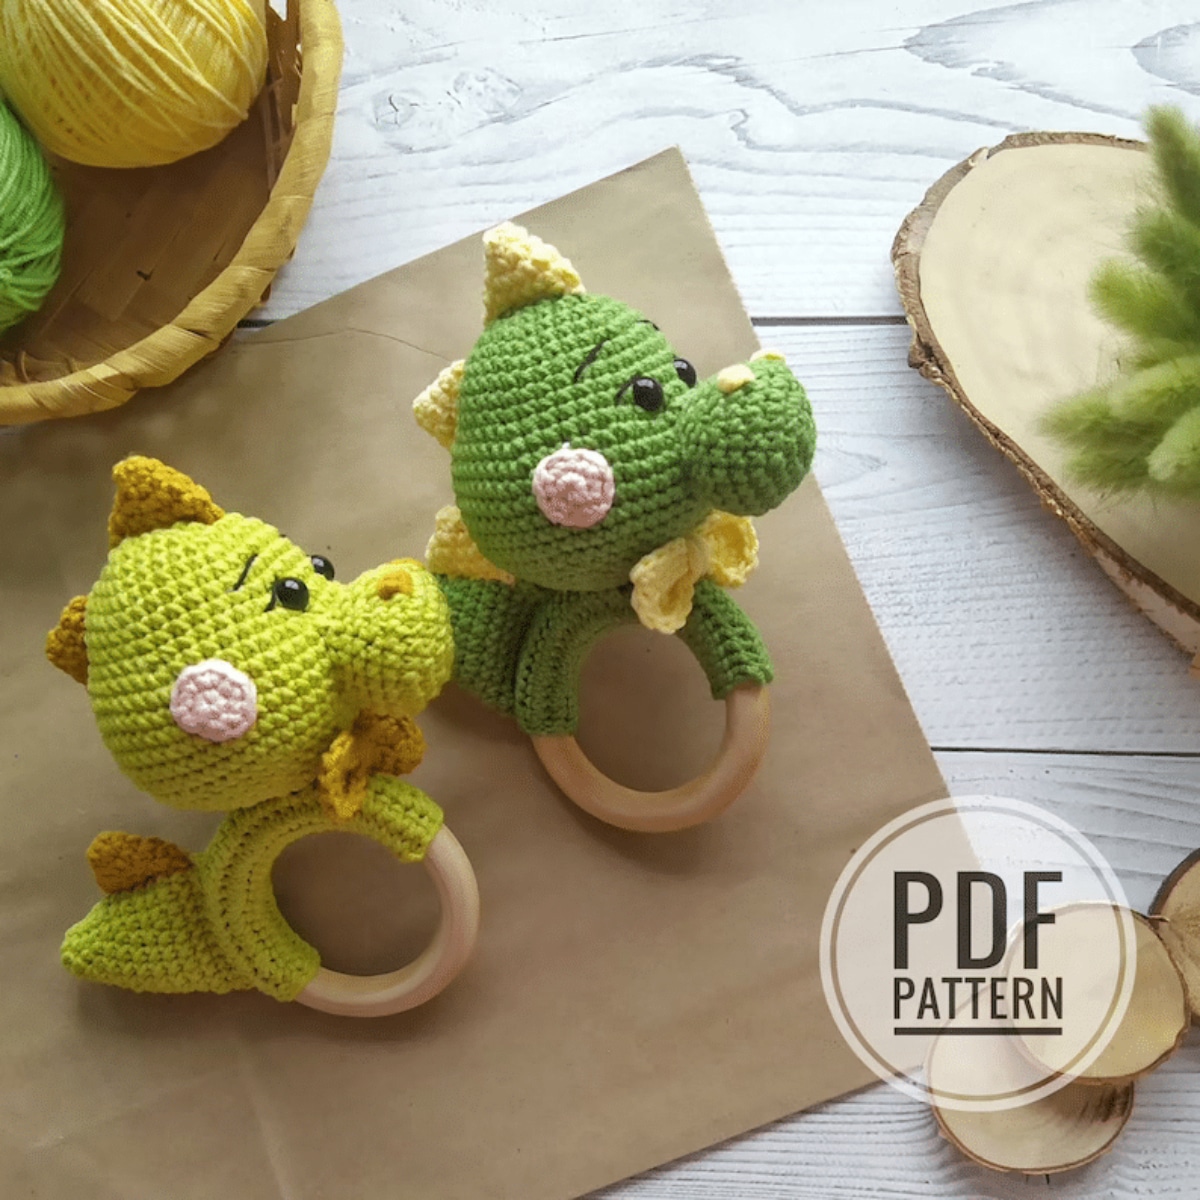 A lime green crochet dinosaur rattle with brown spikes on its head and tail next to a dark green dinosaur rattle with the same pattern.